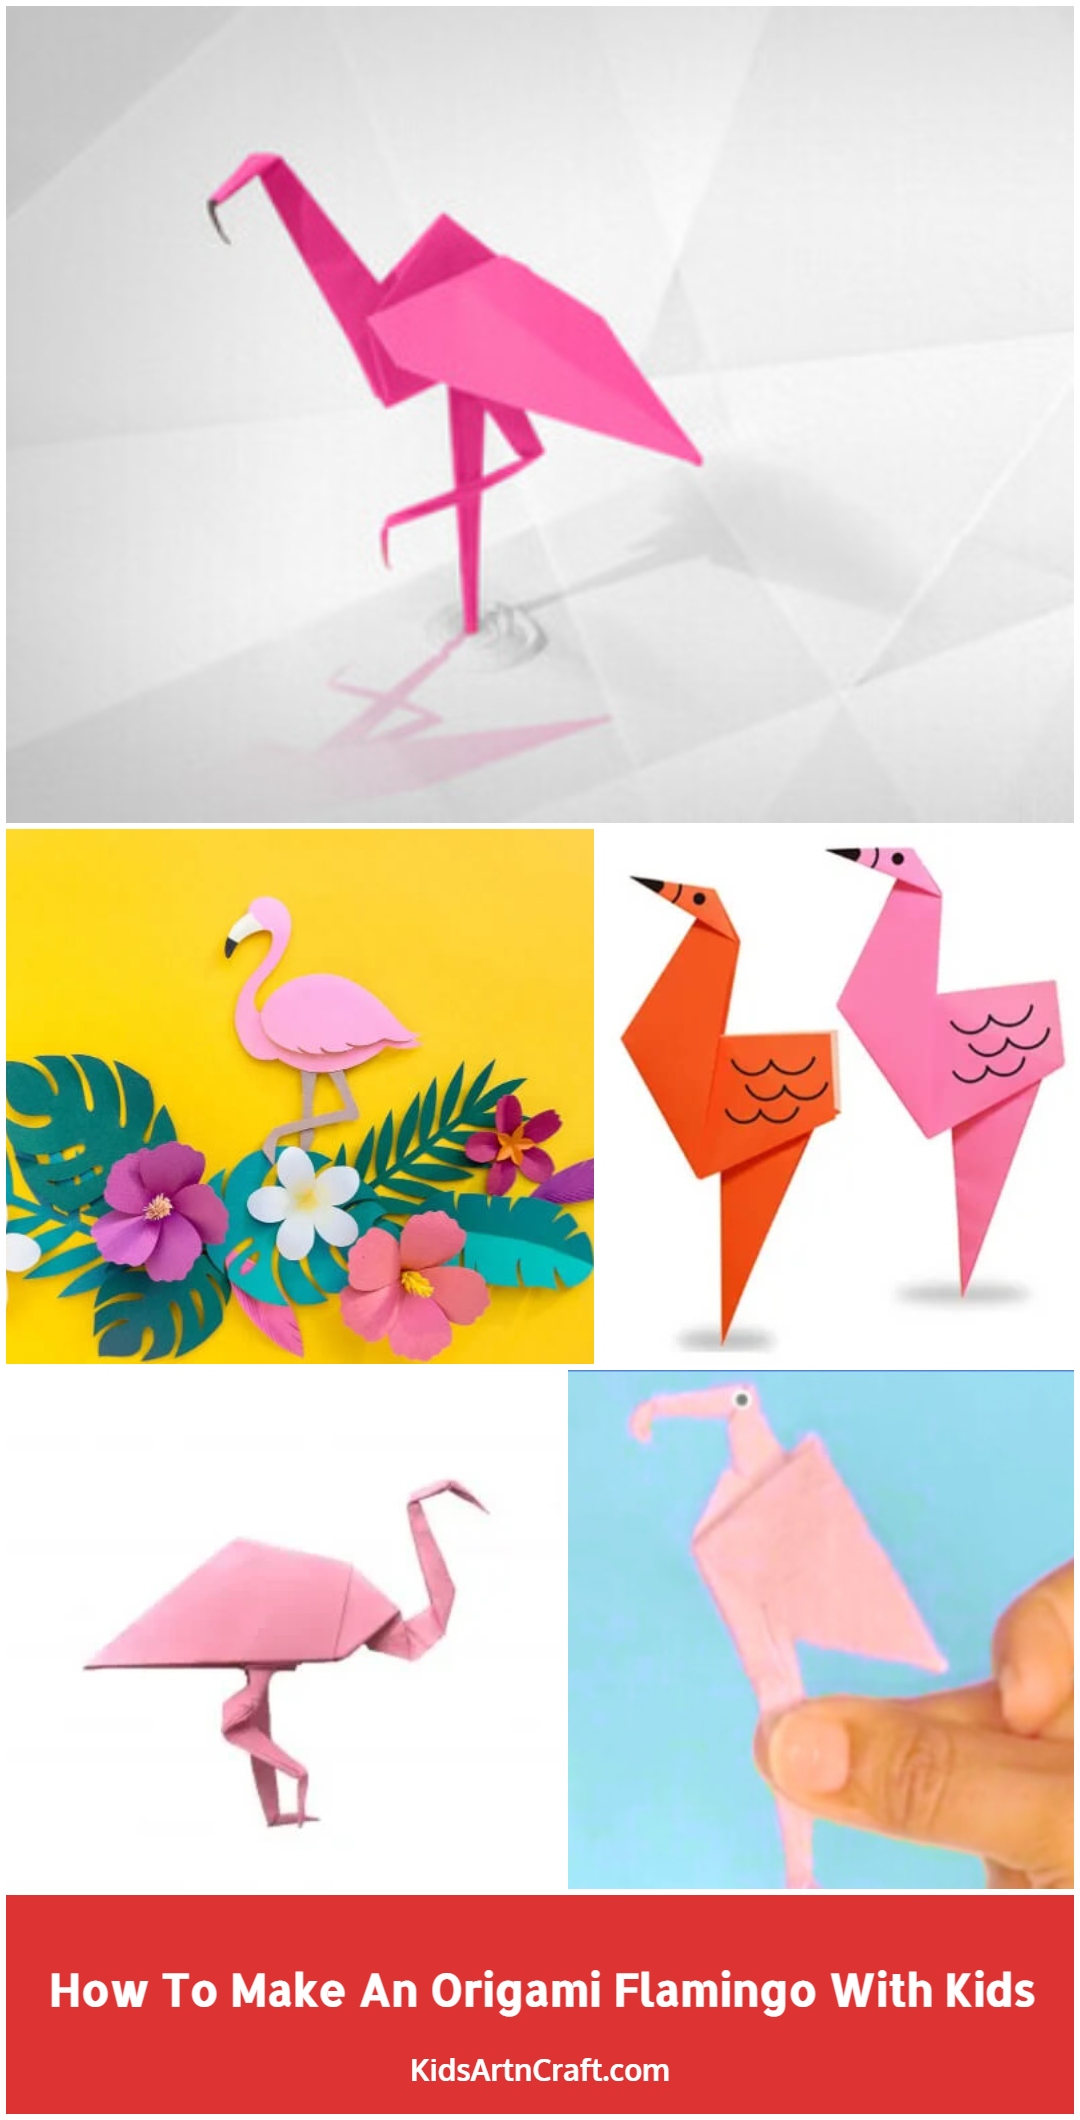 How To Make An Origami Flamingo With Kids